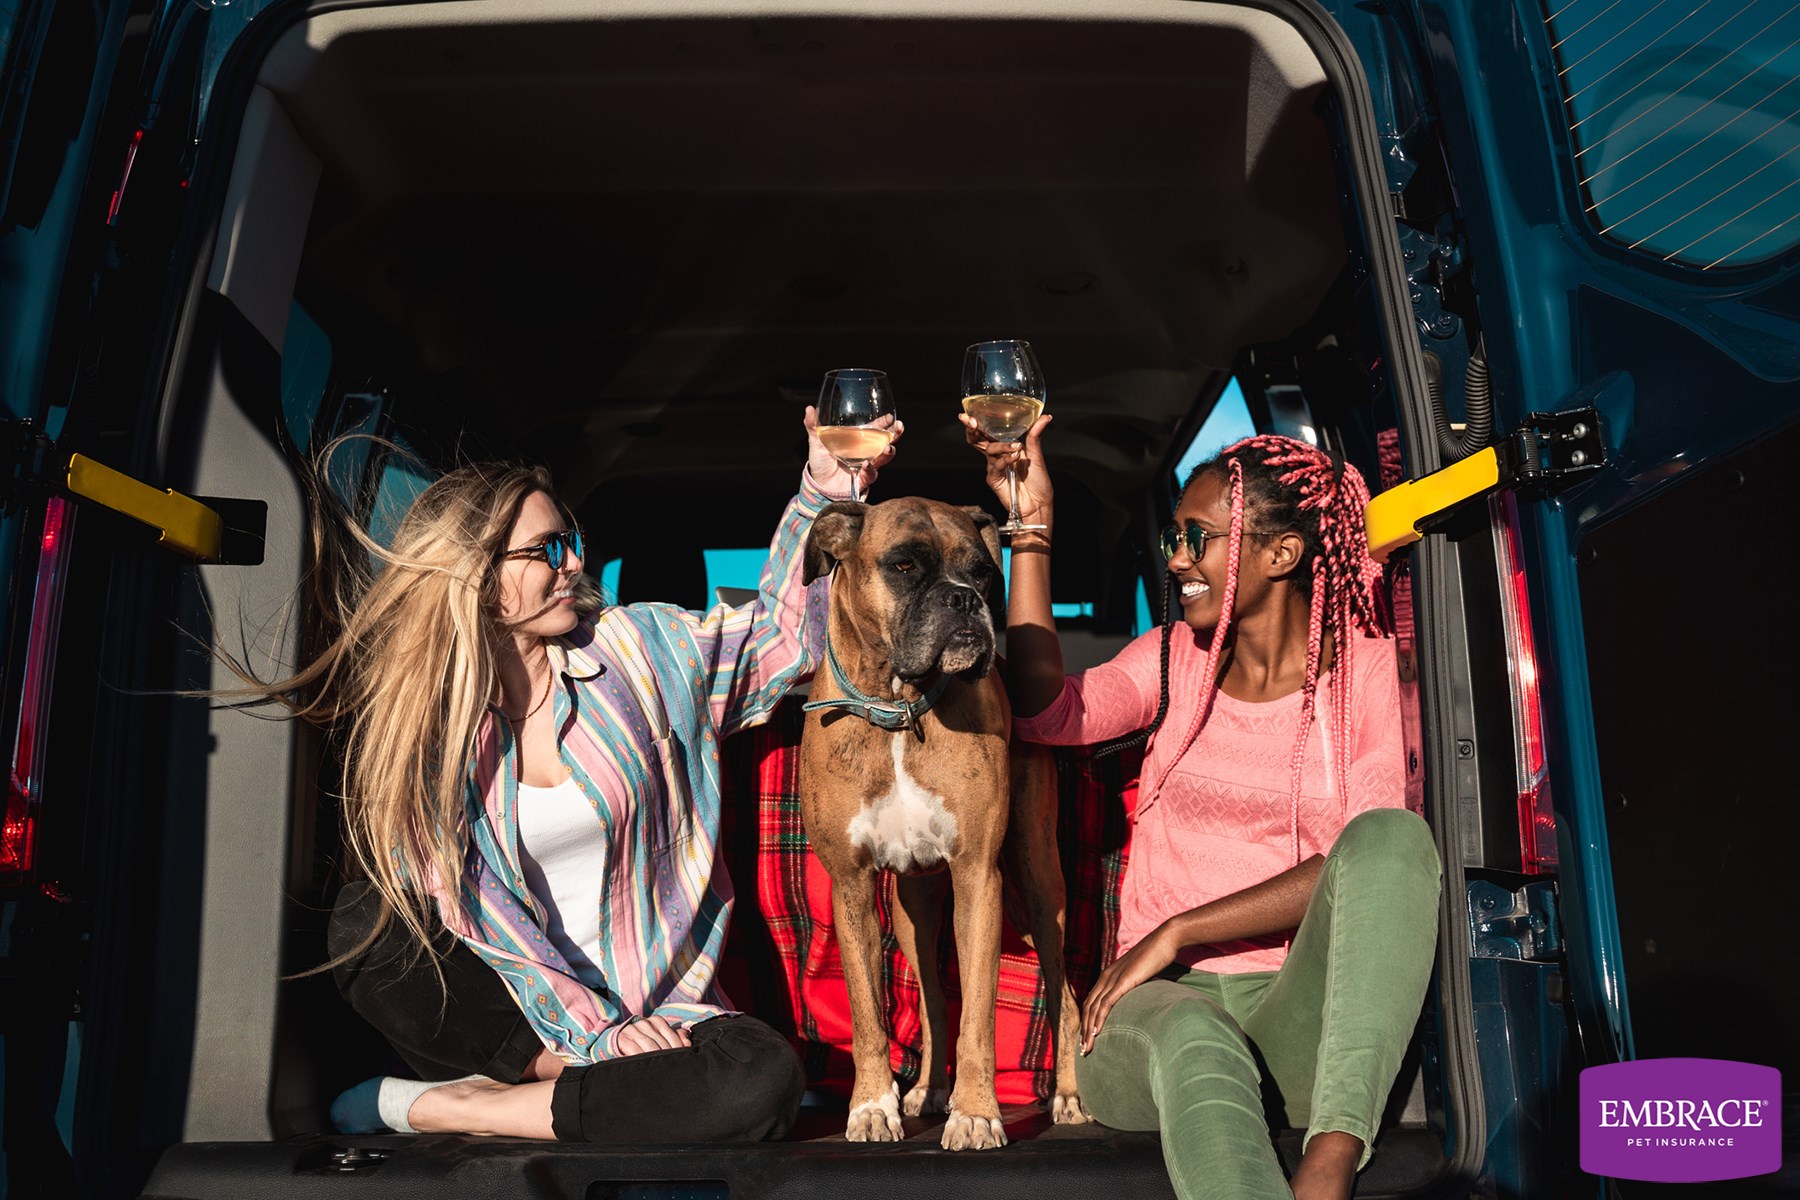 Using a pet temperature monitor in your RV - Kamper Jobs